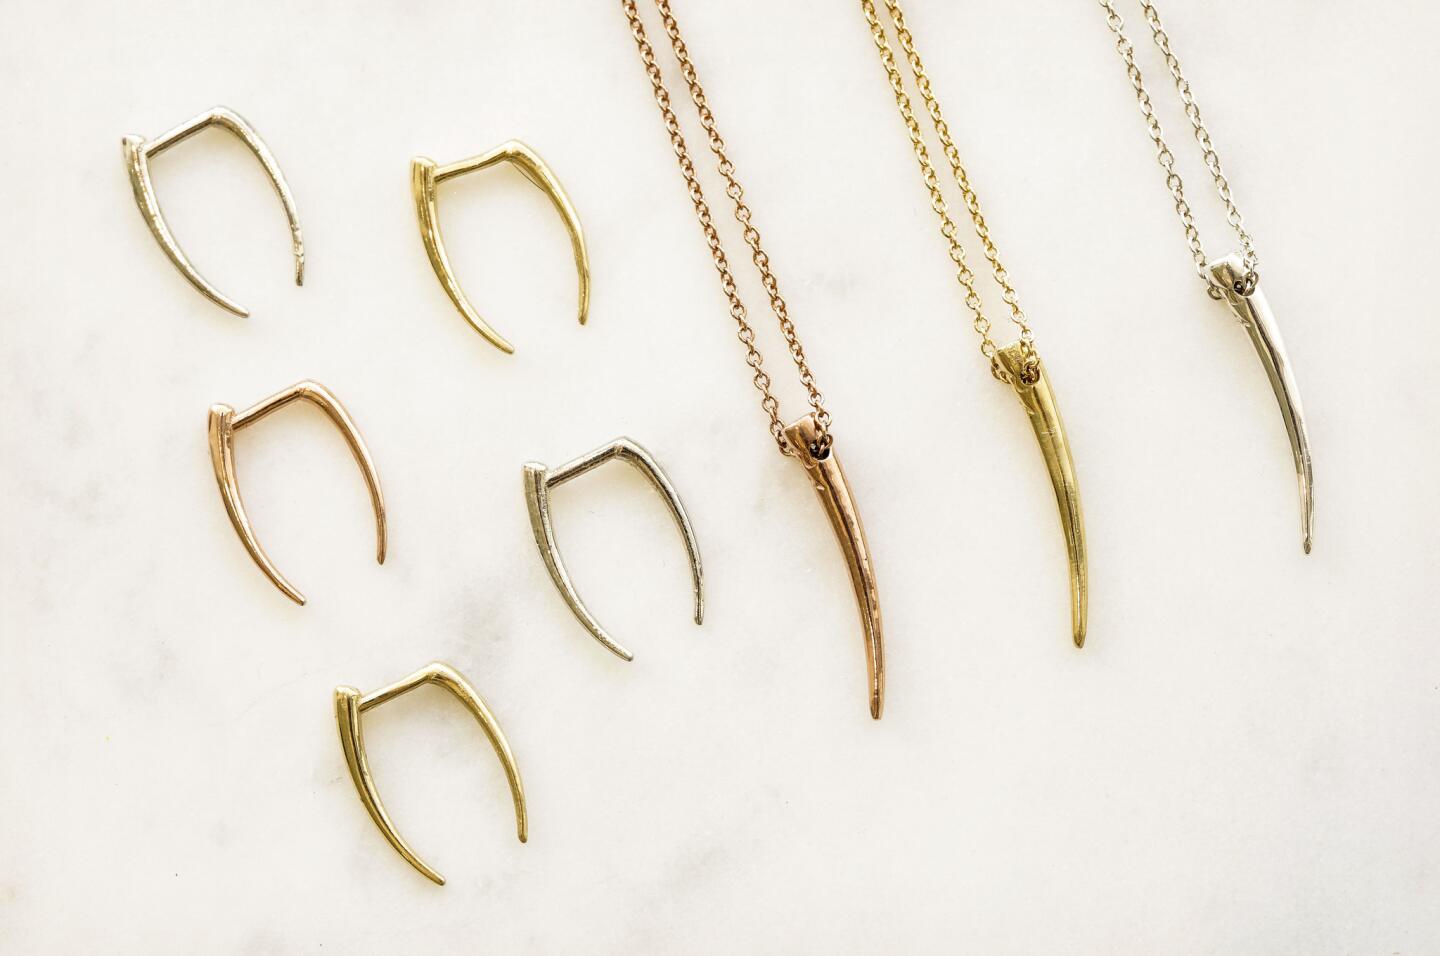 Gabriela Artigas' jewelry is a study in contrasts. A mix of bold and delicate, organic and geometric, precious and semiprecious, the pieces -- including razor-thin diamond cuffs and standout ox horn pendant necklaces -- are designed to be combined and worn in different ways.